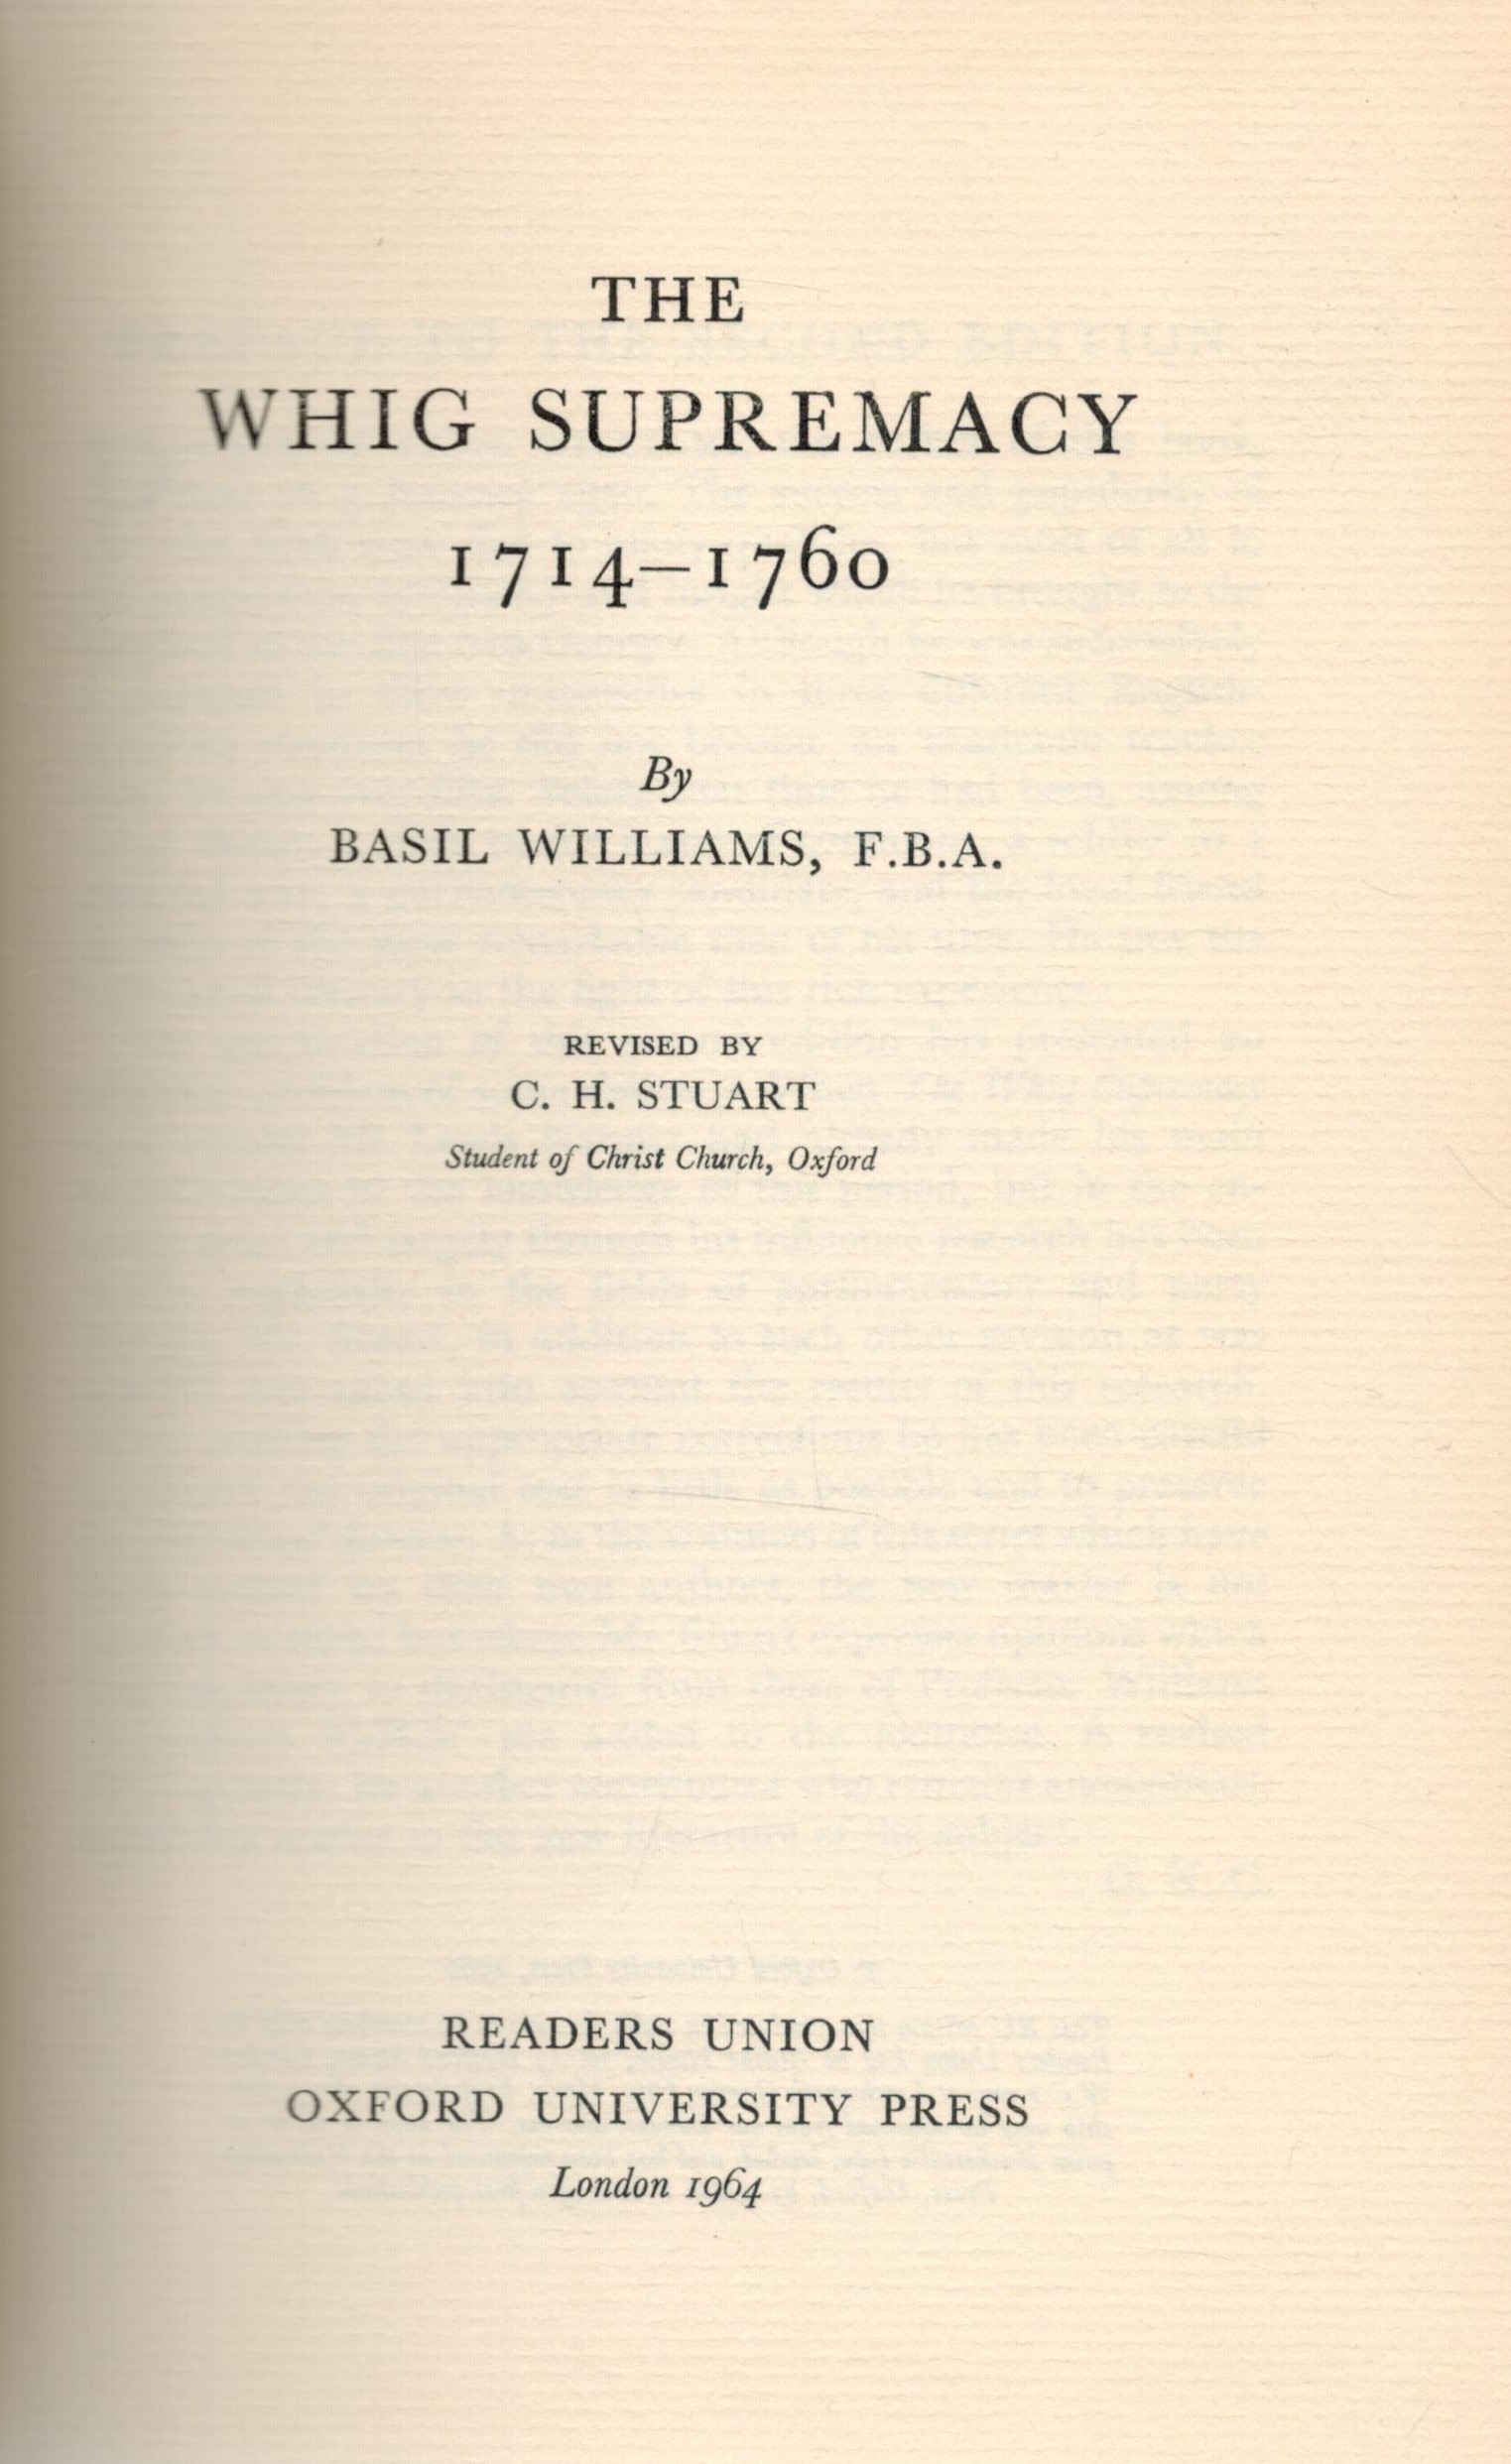 The Whig Supremacy 1714 - 1760 by Basil Williams 1964 Readers Union Edition Hardback Book with 504 - Image 2 of 3